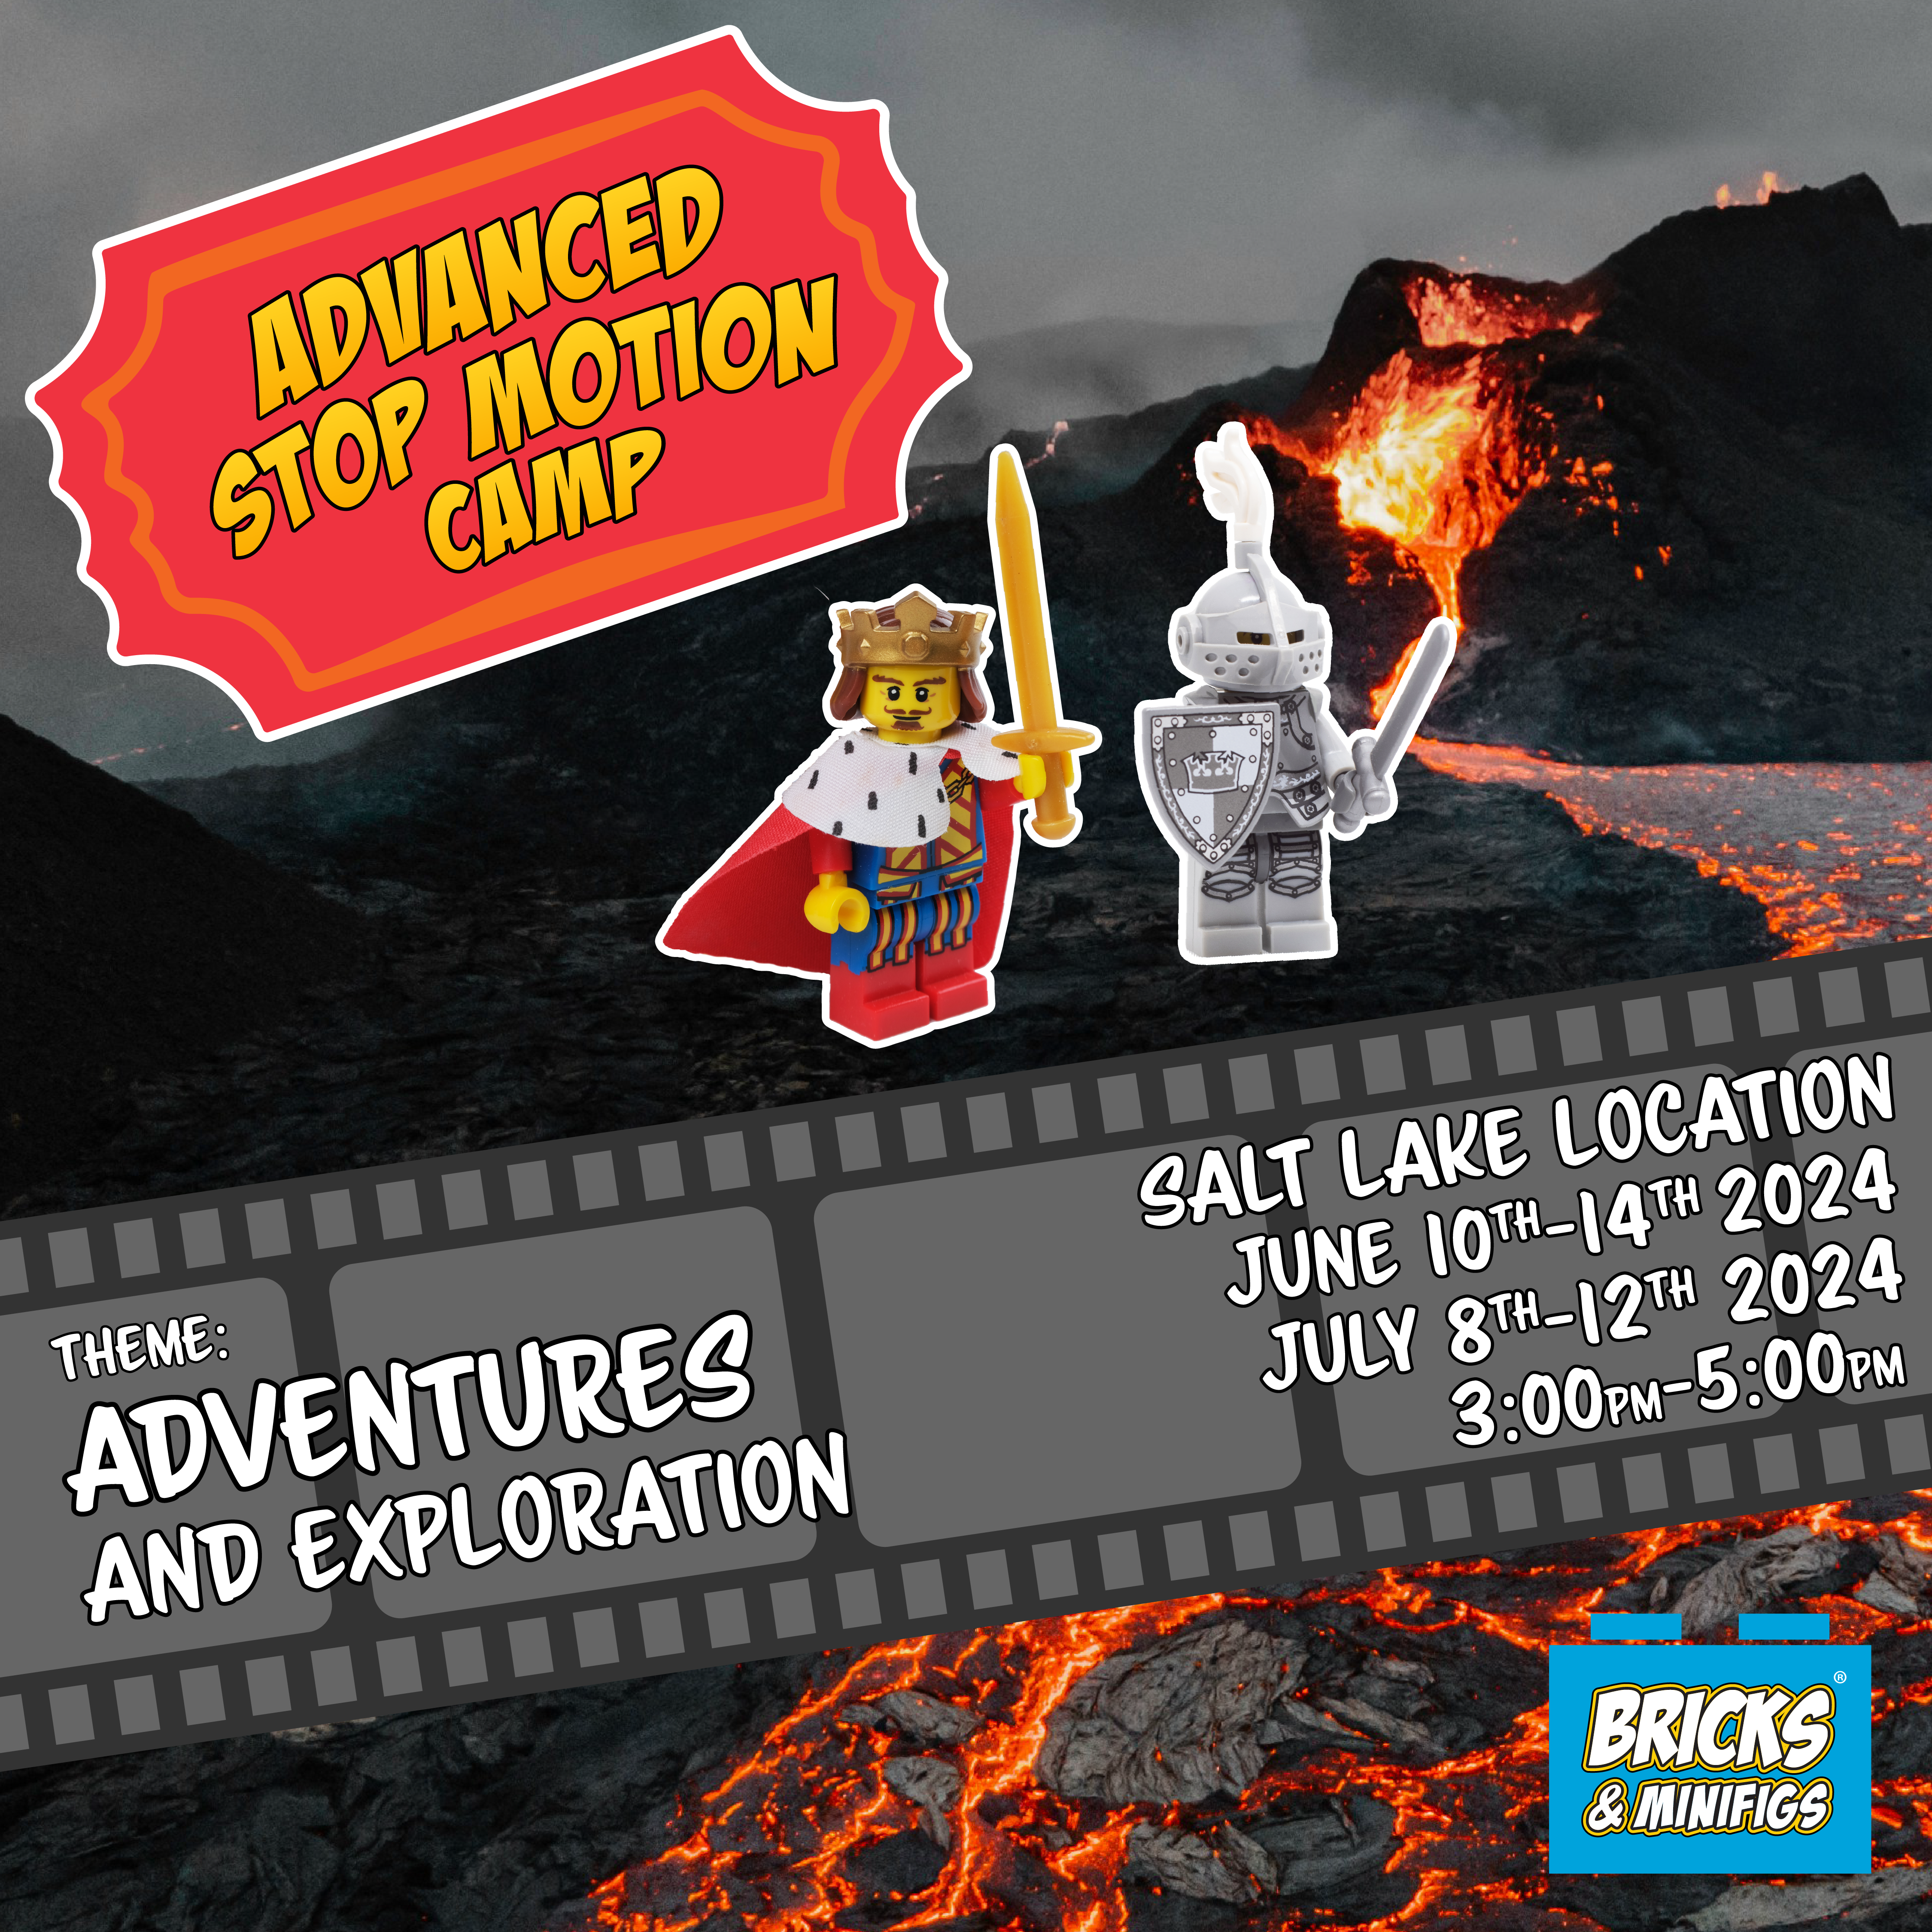 Advanced Stop Motion Camp: Summer 2024 - Adventures and Exploration (July 8-12 2024, 3:00 - 5:00 pm, Salt Lake)